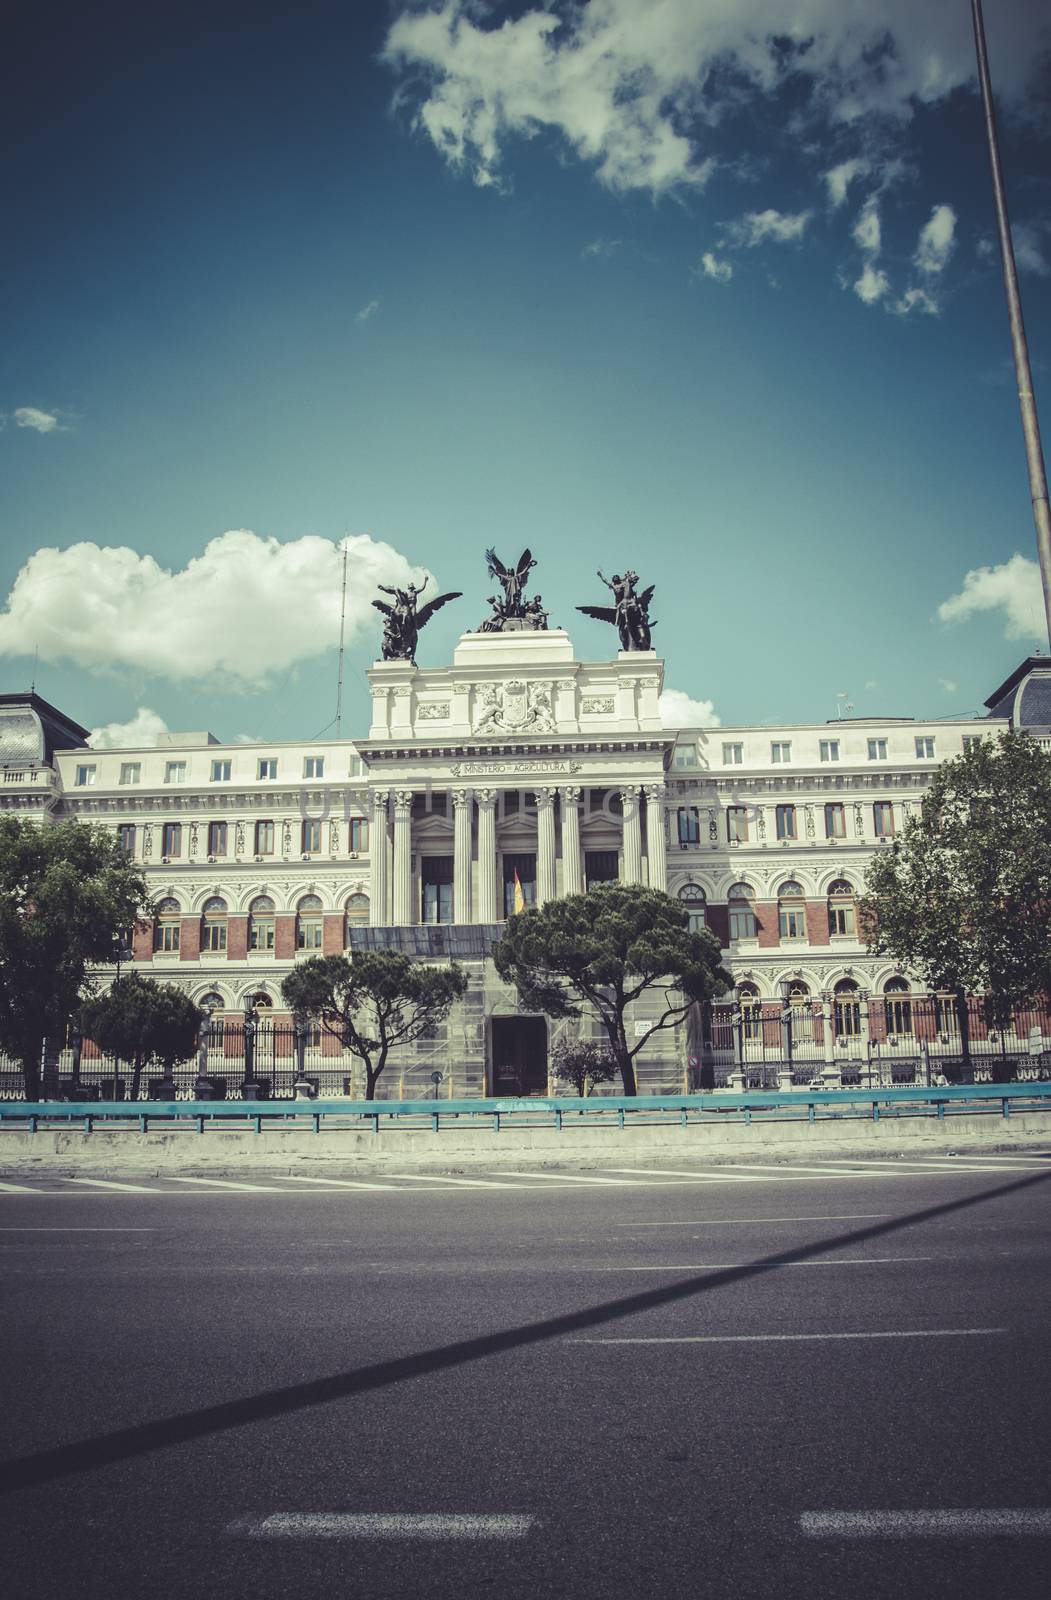 Agriculture ministry Image of the city of Madrid, its characteri by FernandoCortes